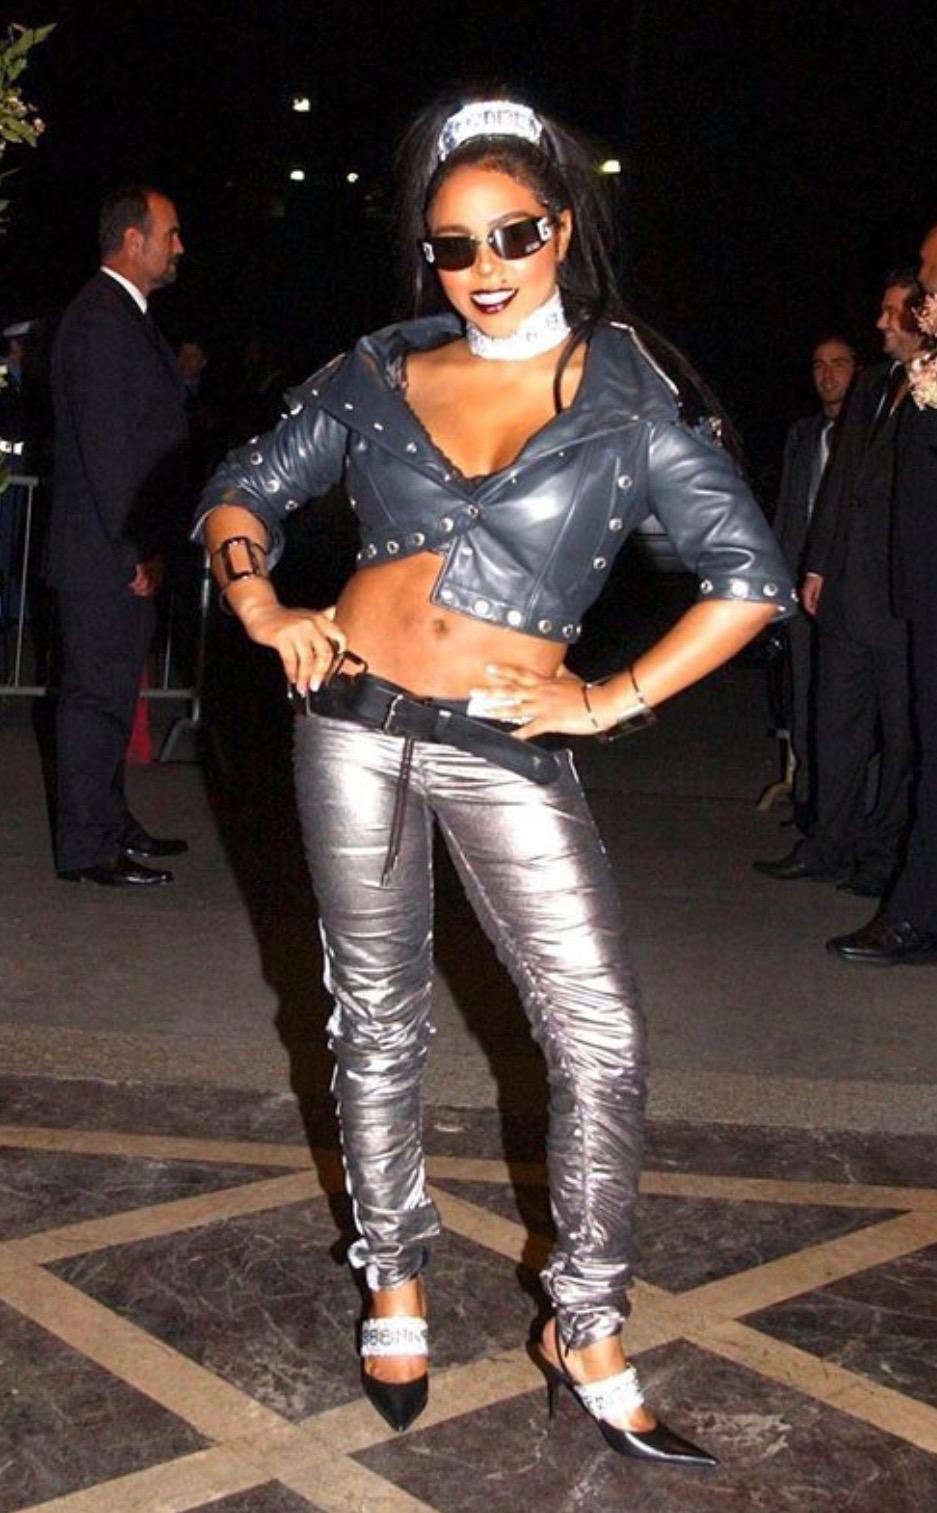 Presenting a pair of 'D' and 'G' Dolce and Gabbana silver plate cuffs. From 2003, these fabulous cuffs were seen on Lil' Kim at a Dolce and Gabbana party. These fabulous cuffs are the perfect addition to any vintage-infused wardrobe.

Approximate